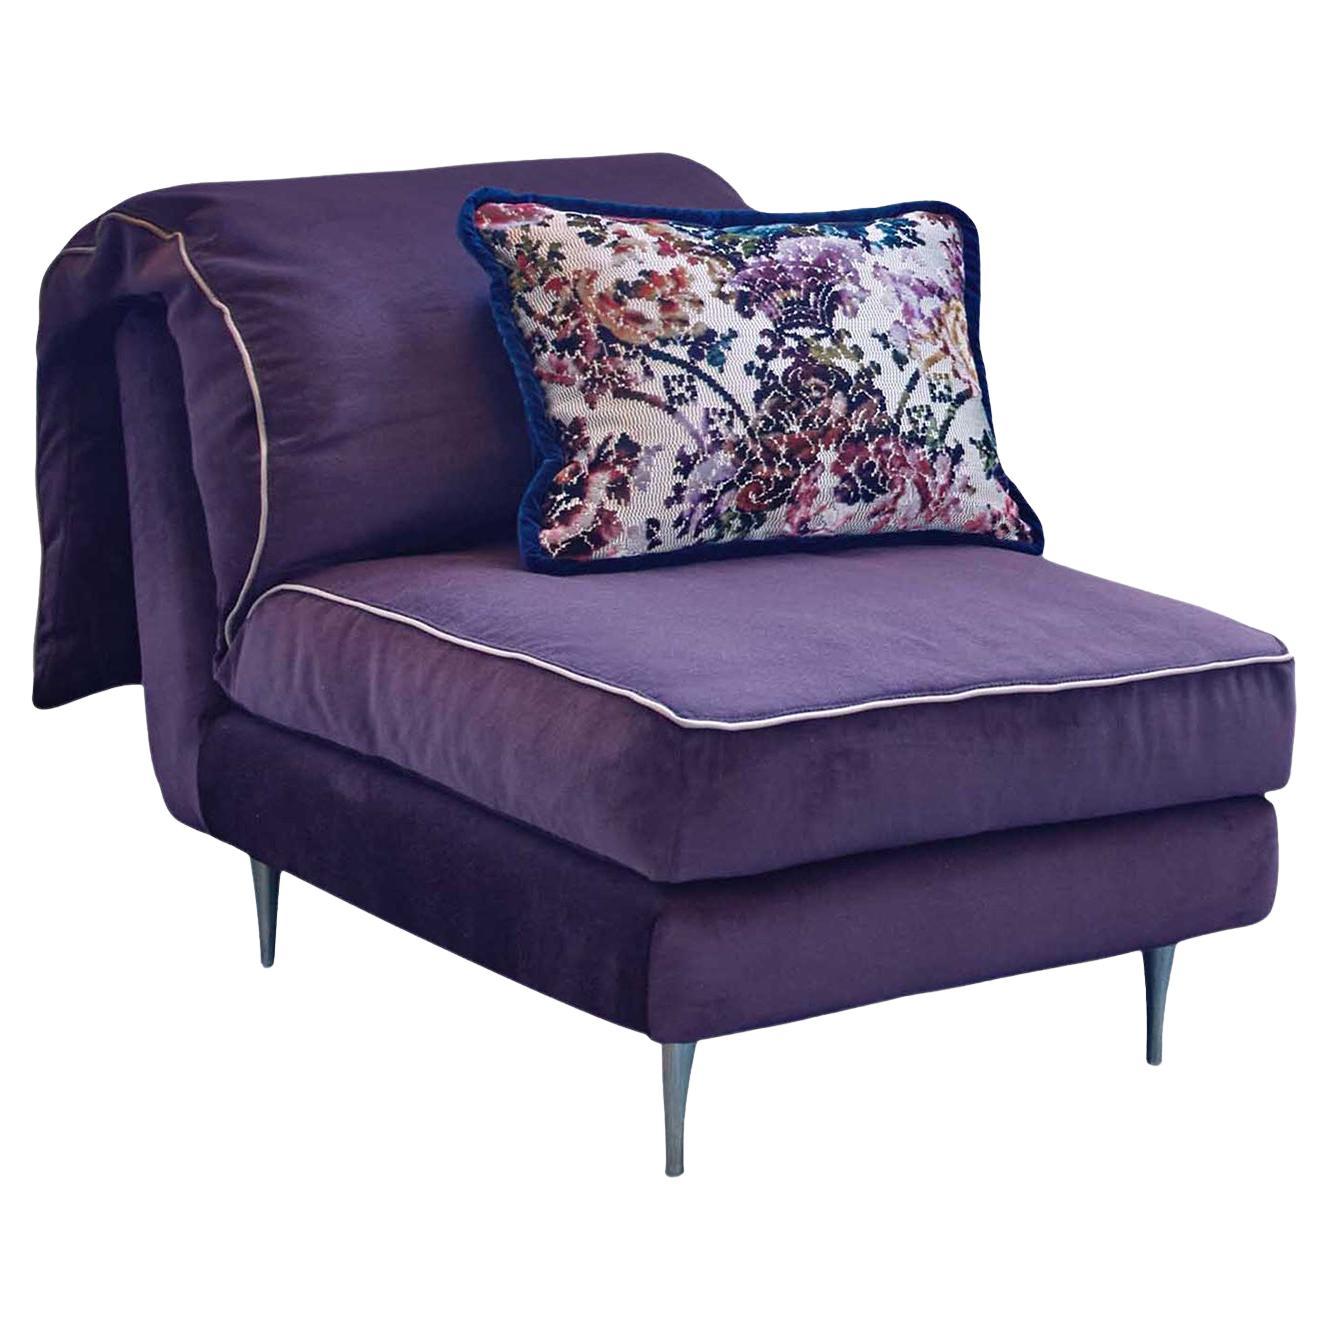 Casquet Mini in Deep Purple Velvet Daybed For Sale